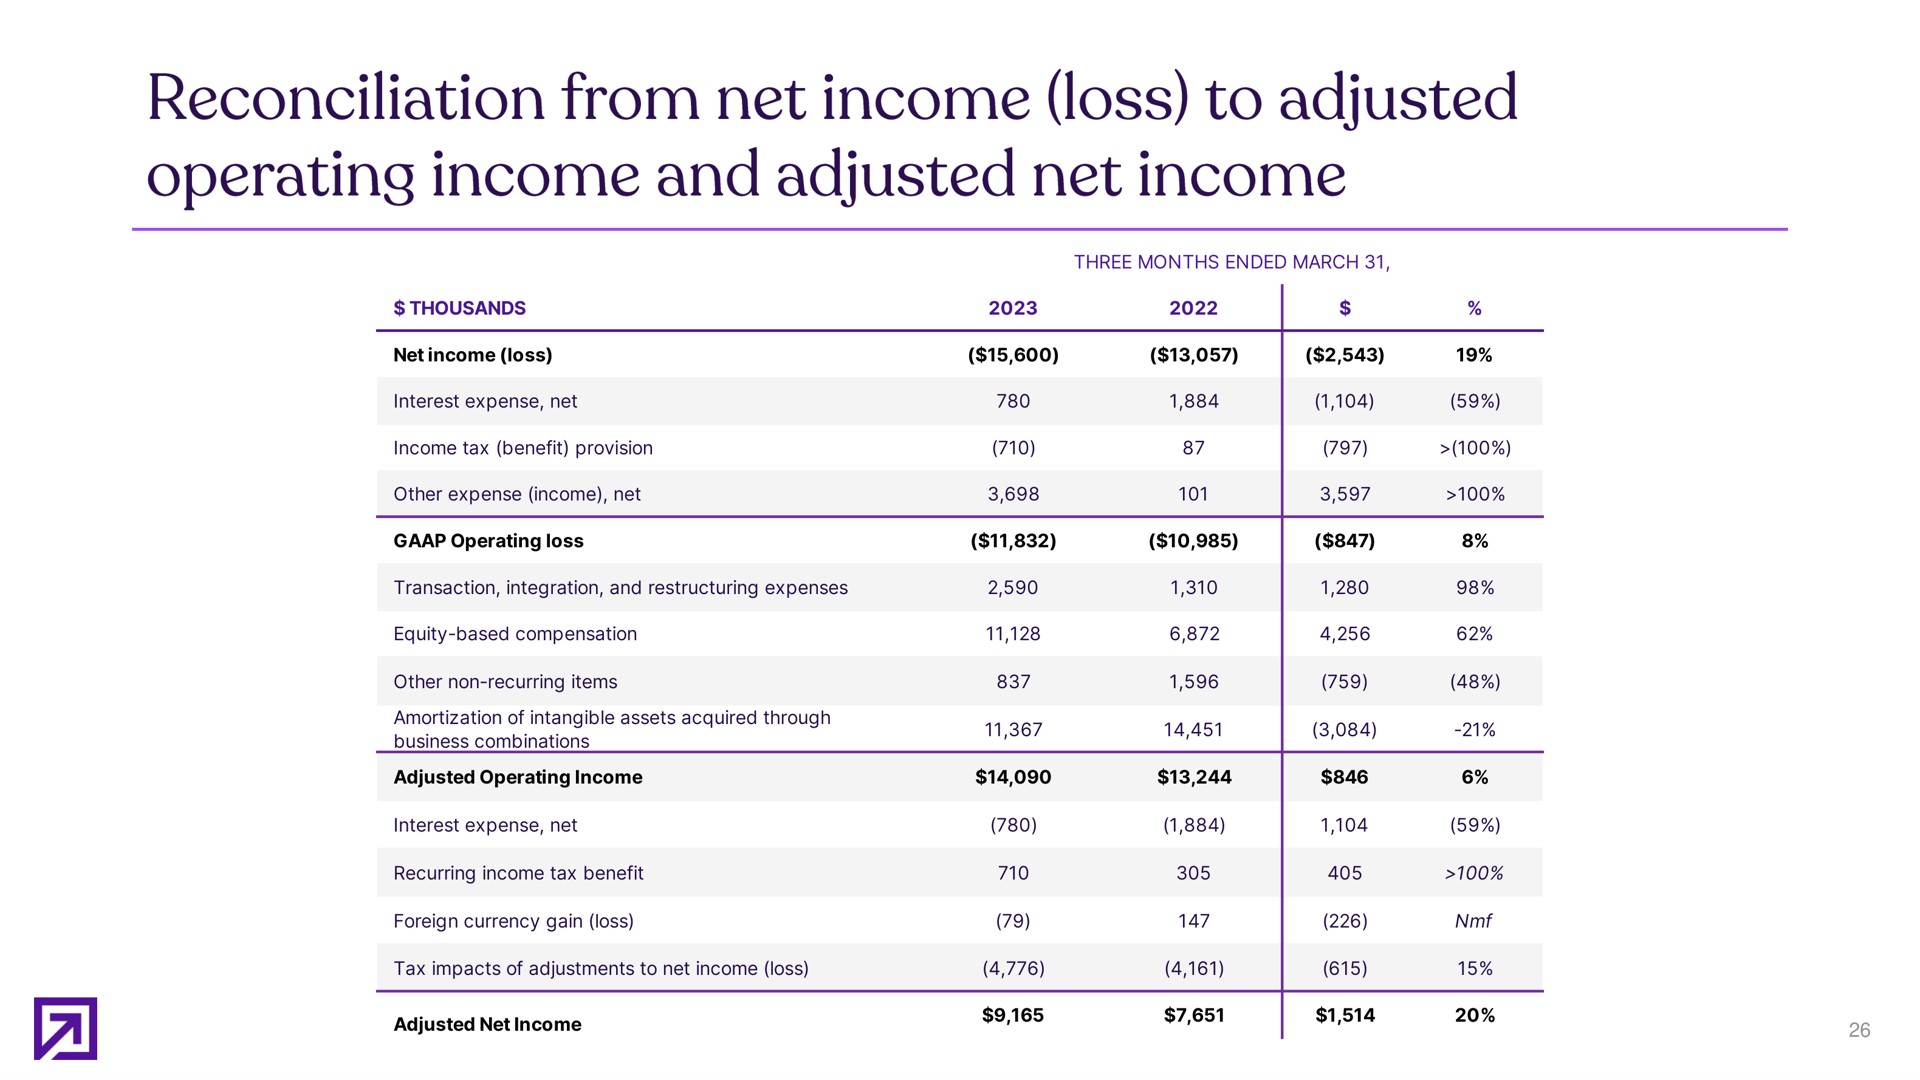 reconciliation from net income loss to adjusted operating income and adjusted net income | Definitive Healthcare